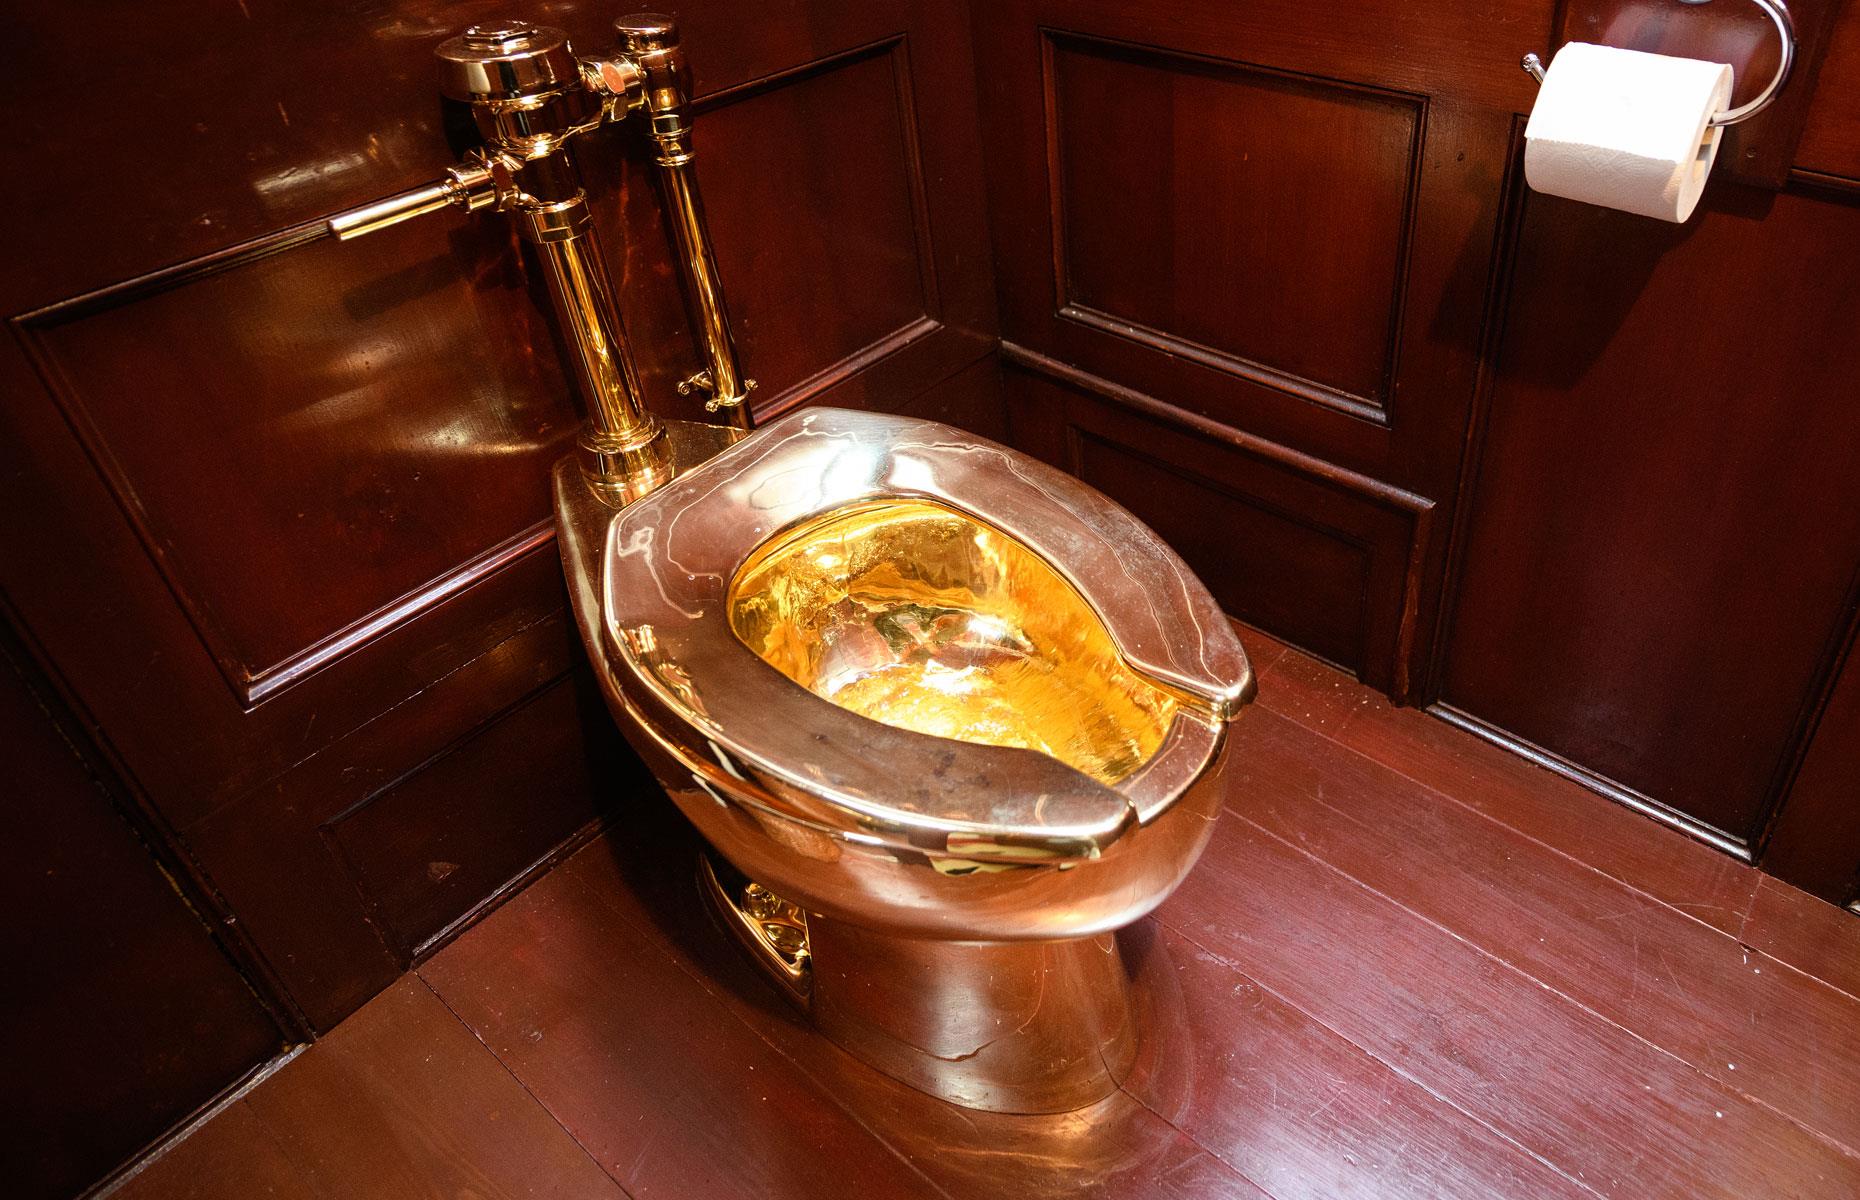 The solid gold toilet worth $6 million (£4.8m)